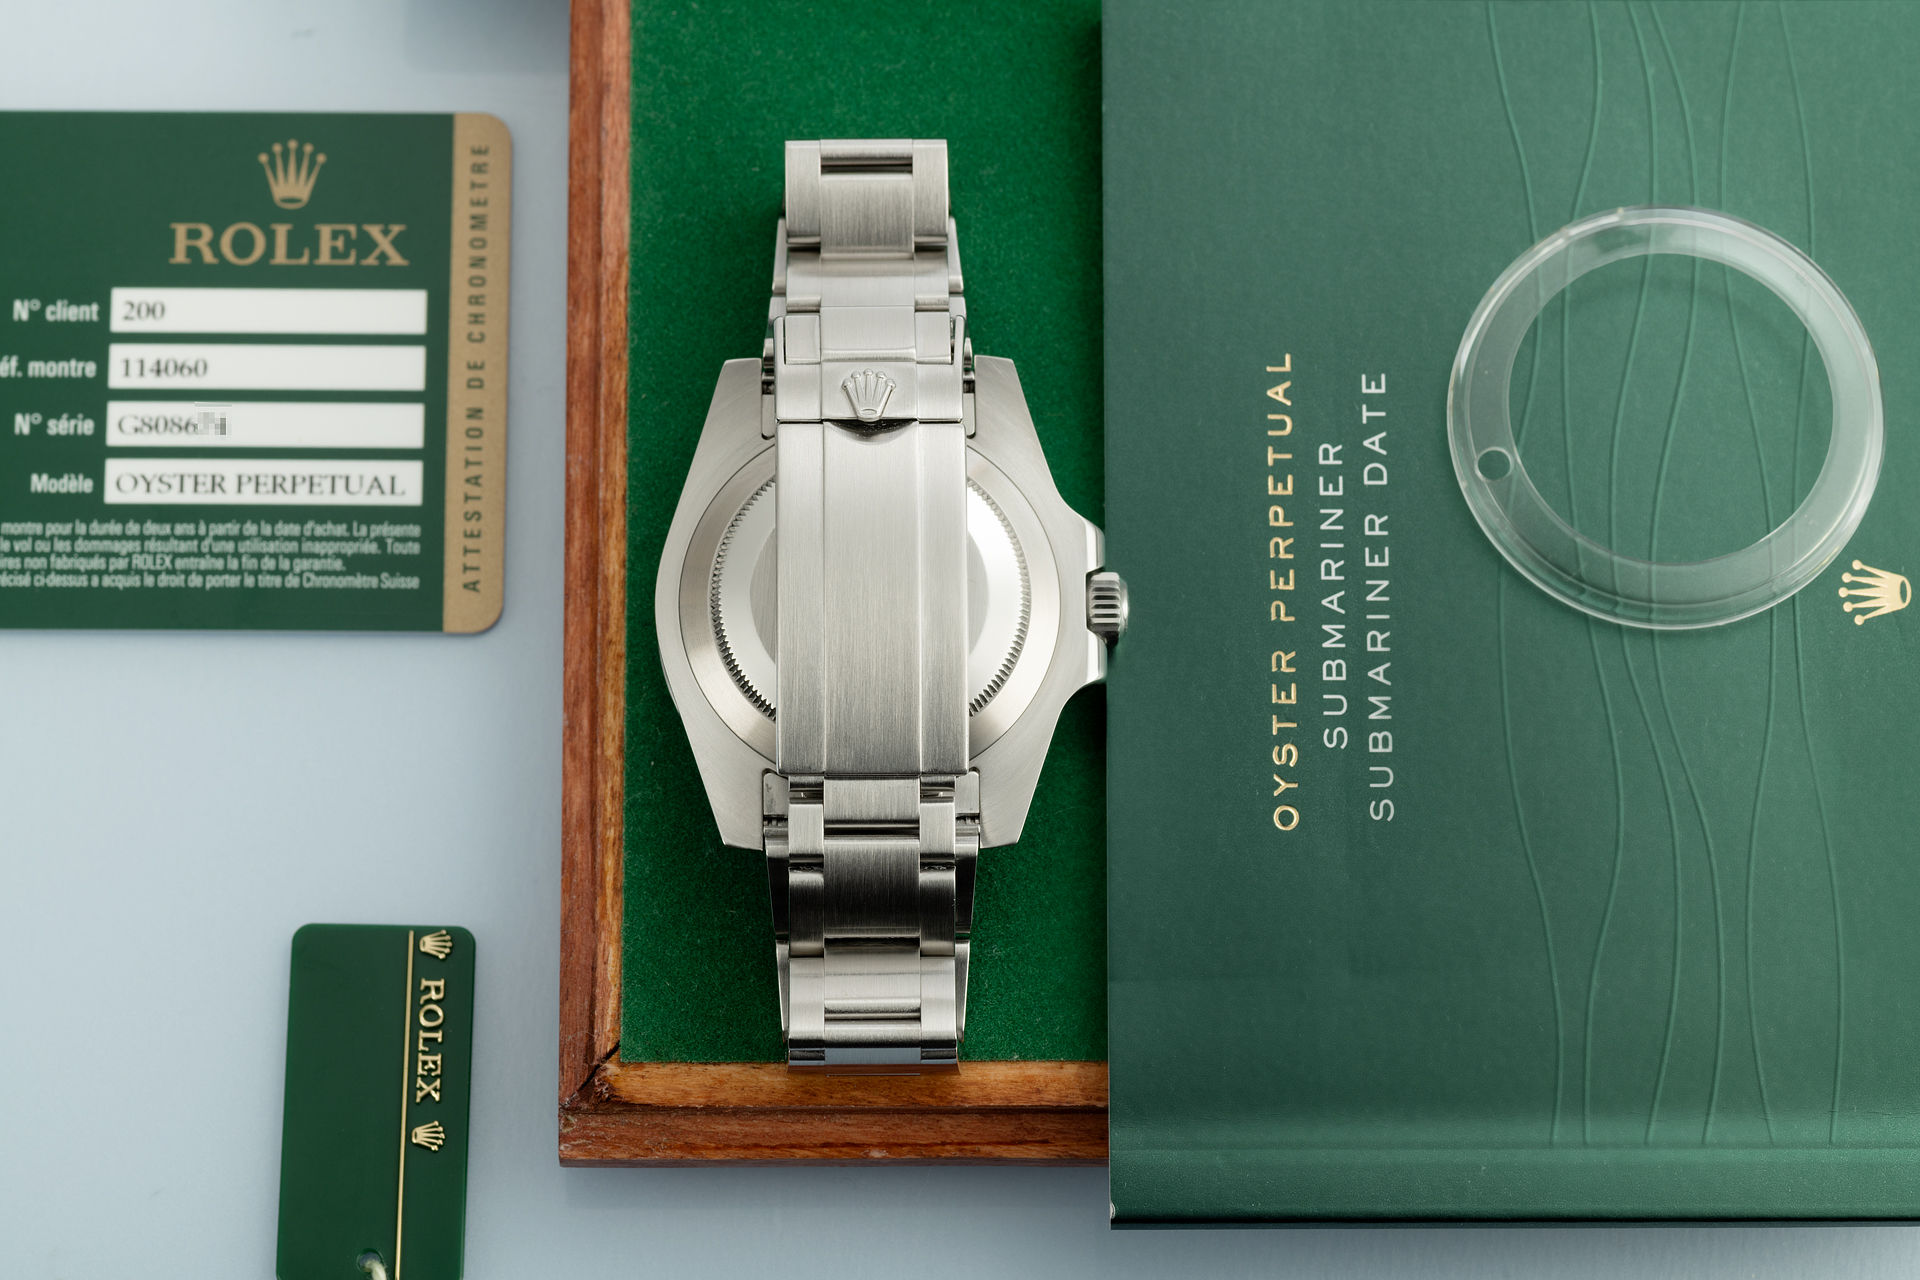 Latest Model "Box & Papers" | ref 114060 | Rolex Submariner 